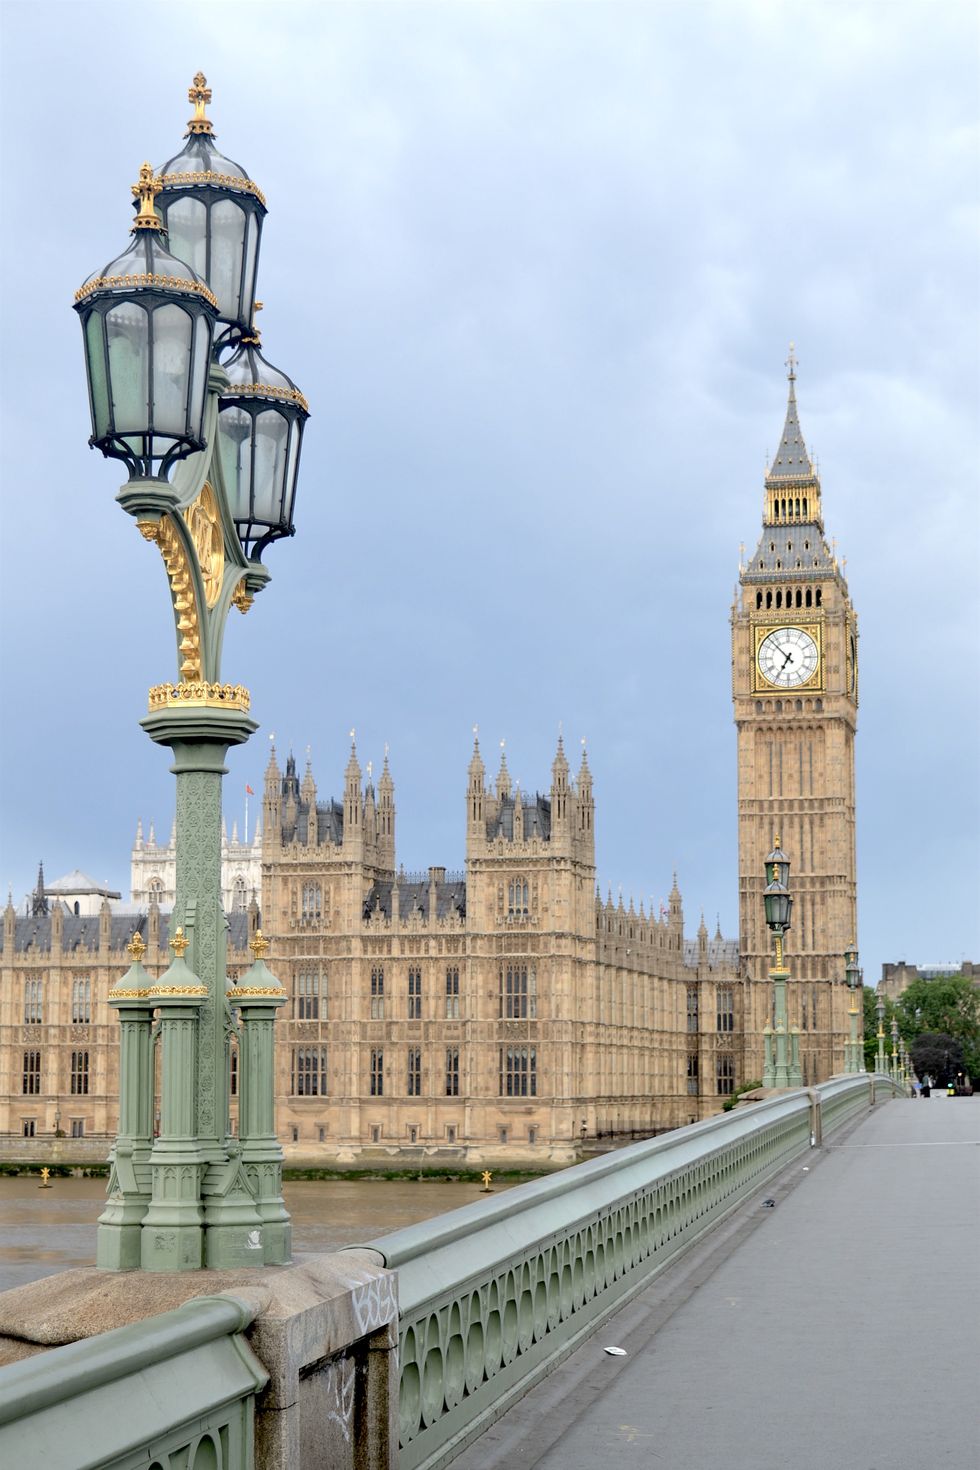 <p>Contrary to popular belief, Big Ben is actually the nickname for the Great Bell of the clock placed in the tower, but often extended to refer to the clock and the clock tower. The tower is actually officially known as Elizabeth Tower, renamed to celebrate the Diamond Jubilee of Elizabeth II in 2012.  </p>